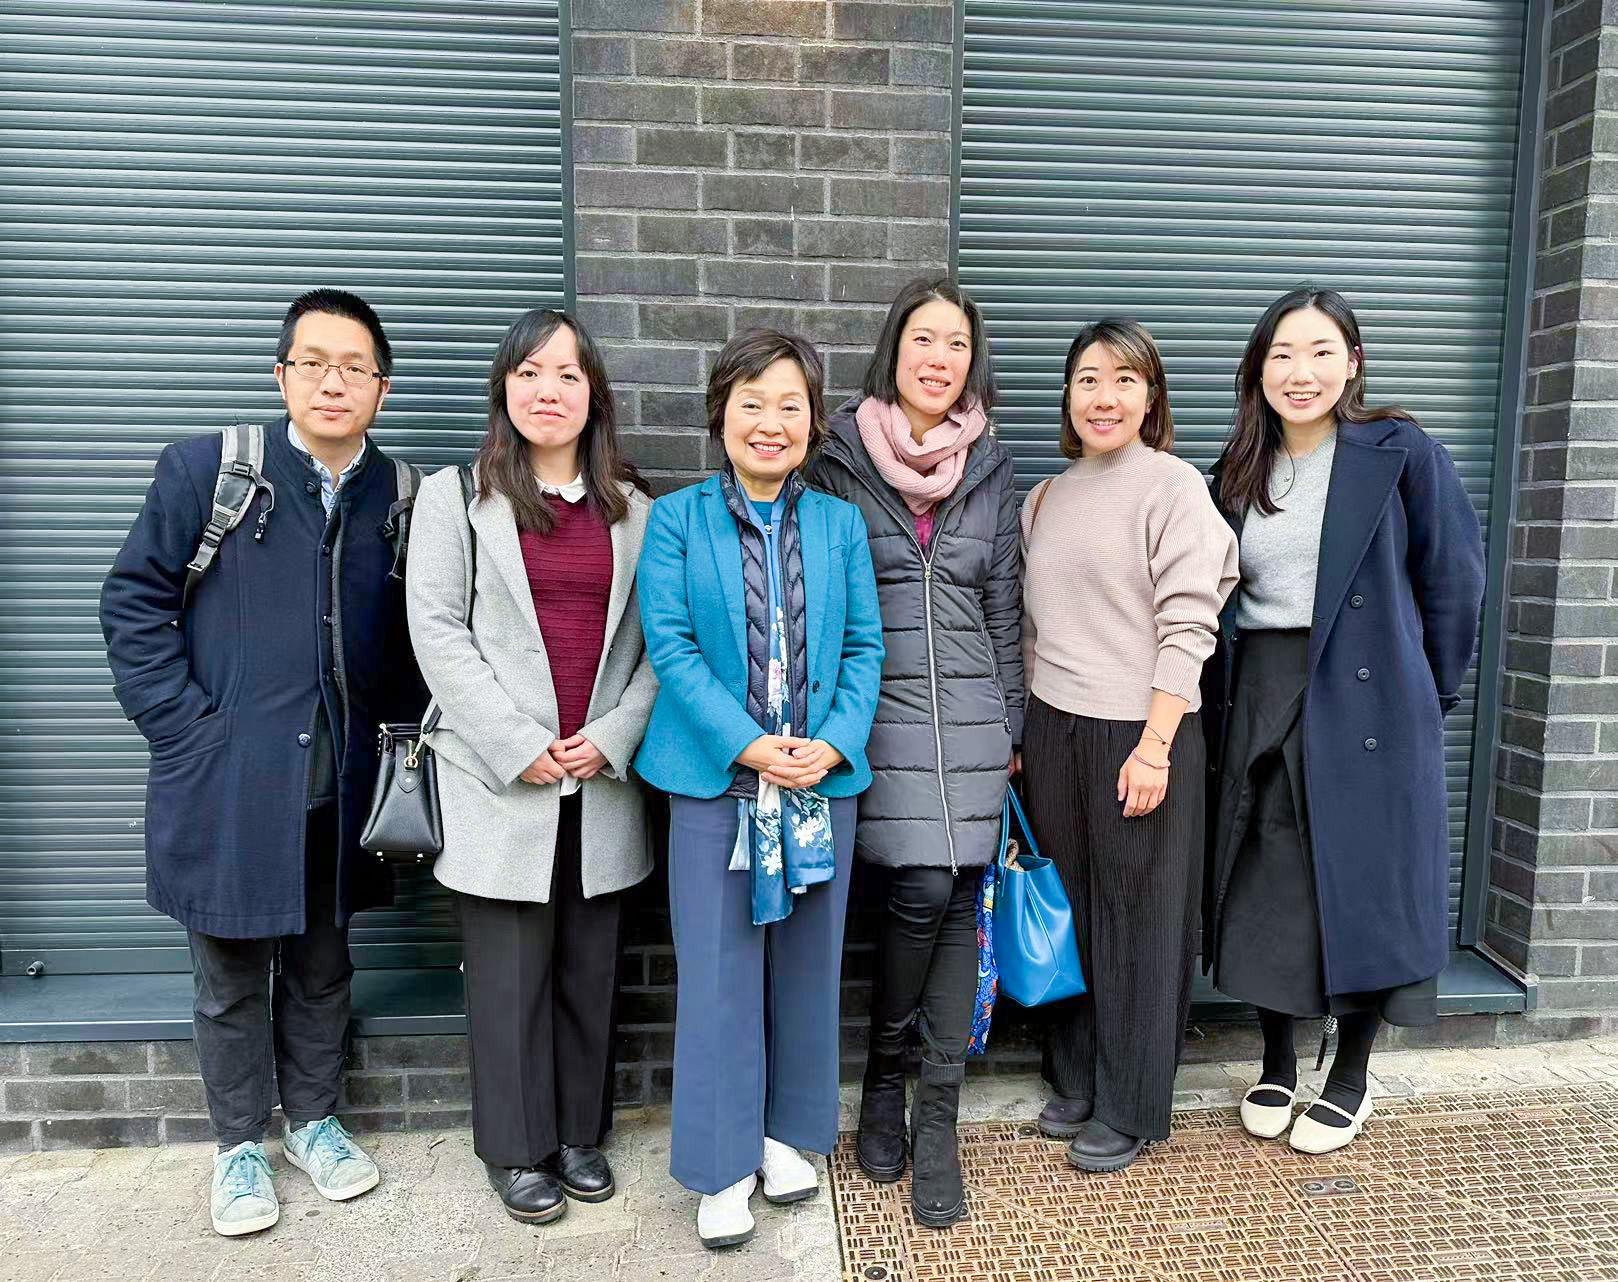 The Secretary for Education, Dr Choi Yuk-lin (third left), meets Hong Kong youngsters working in Germany during her visit to Frankfurt, Germany, on April 21 (Frankfurt time).